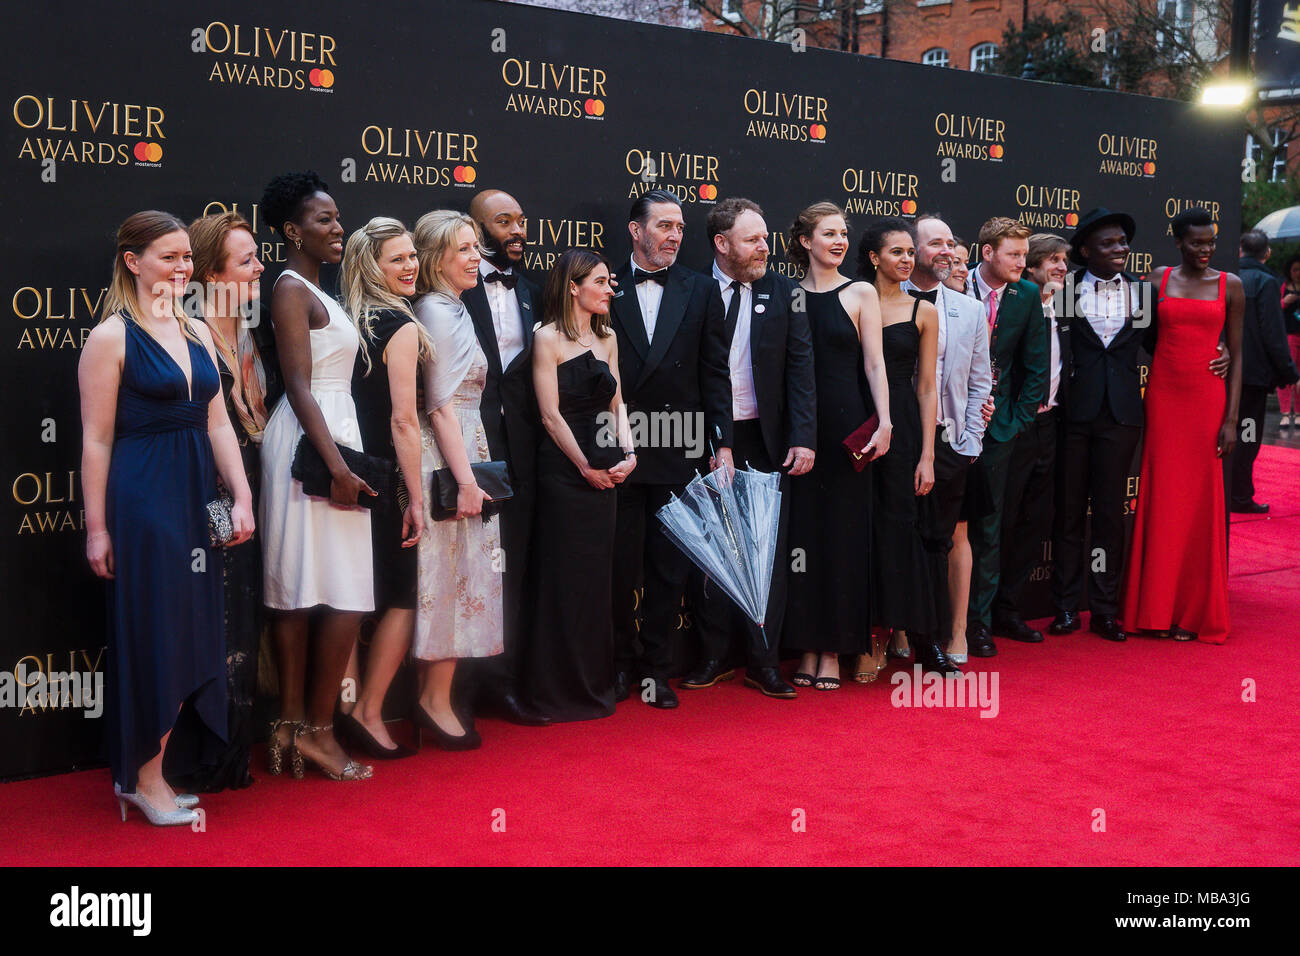 London, UK. 8th April, 2018. The Cast of the Ferryman pos in the rain on the red carpet at the 2018 Olivier Awards held at the Royal Albert Hall. The Ferryman went on to win three Oliviers including Best New Play Credit: David Betteridge/Alamy Live News Stock Photo